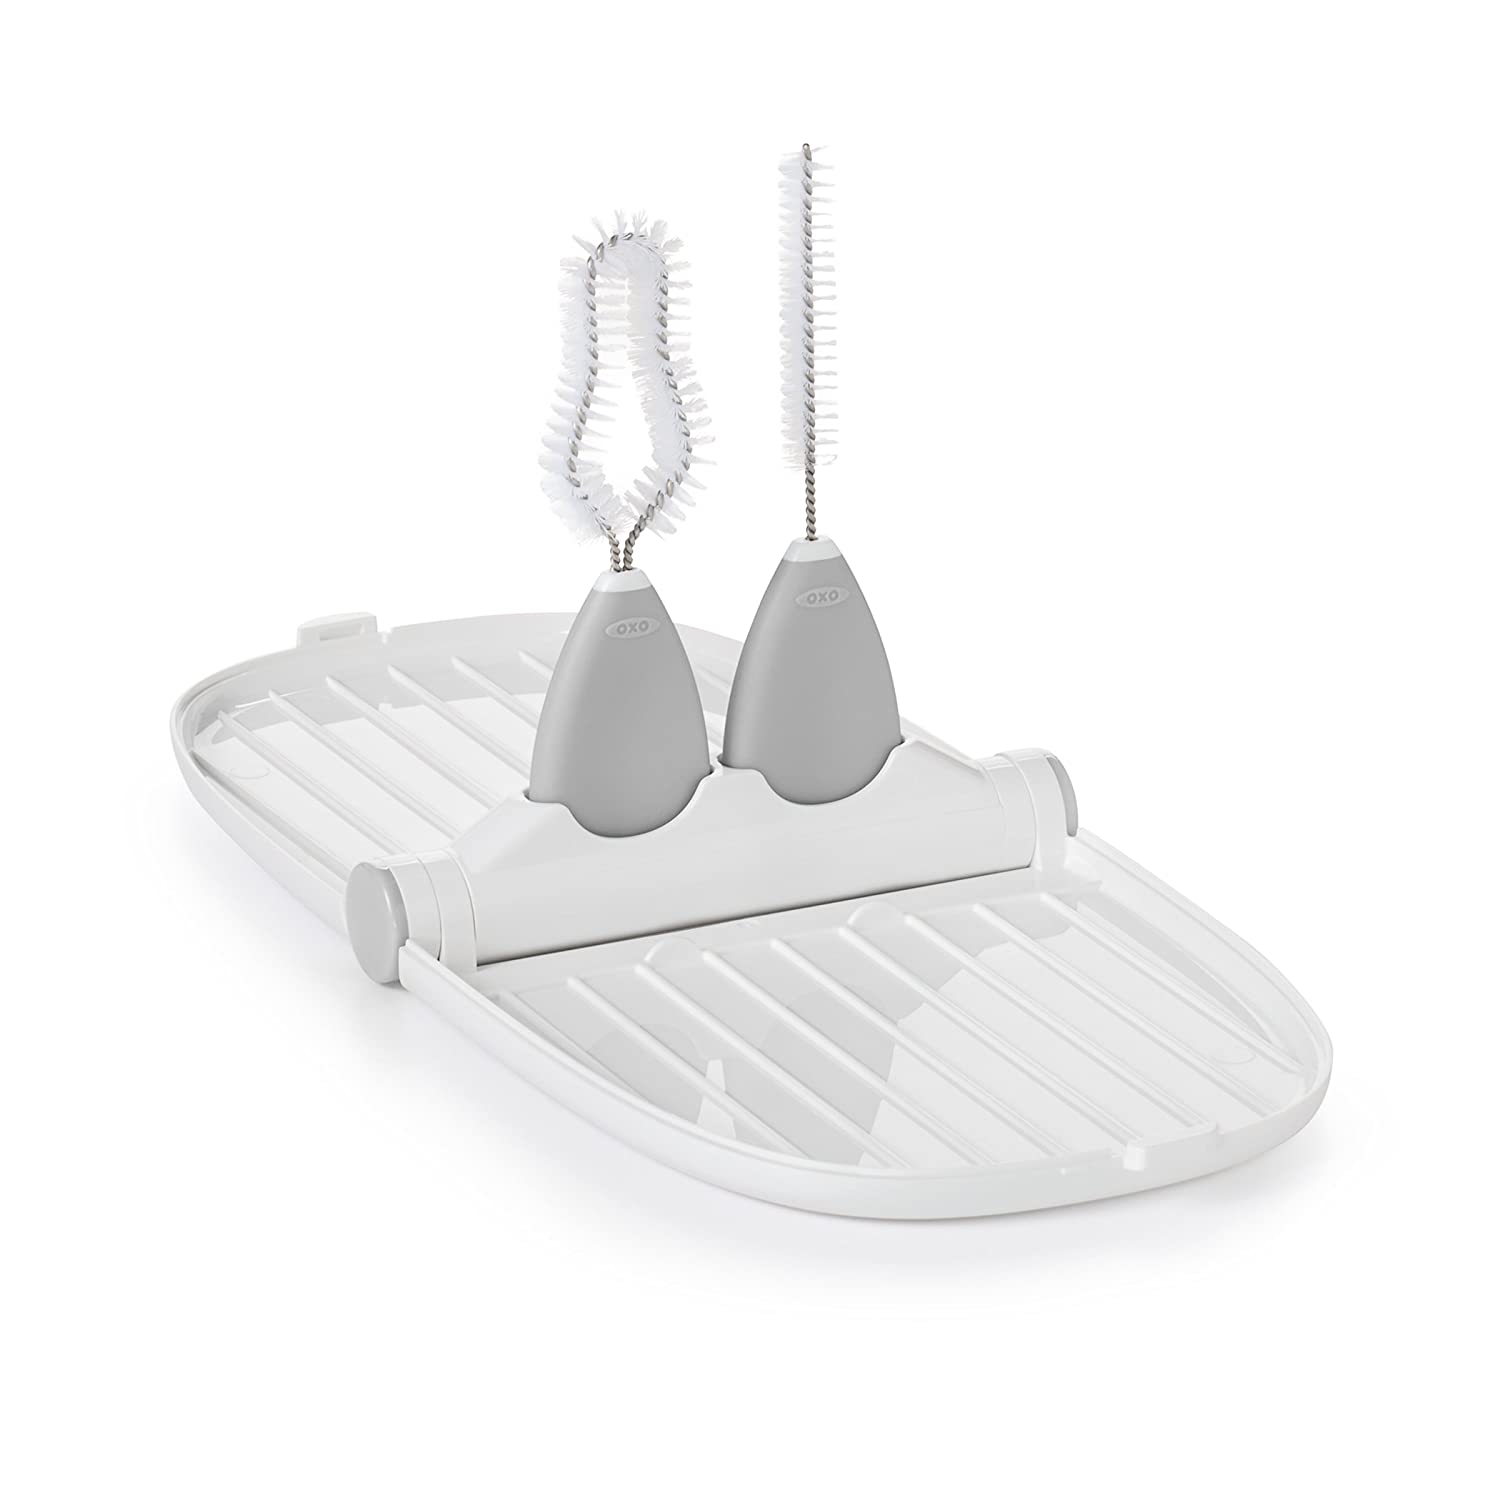 OXO TOT PARTS DRYING RACK GRAY